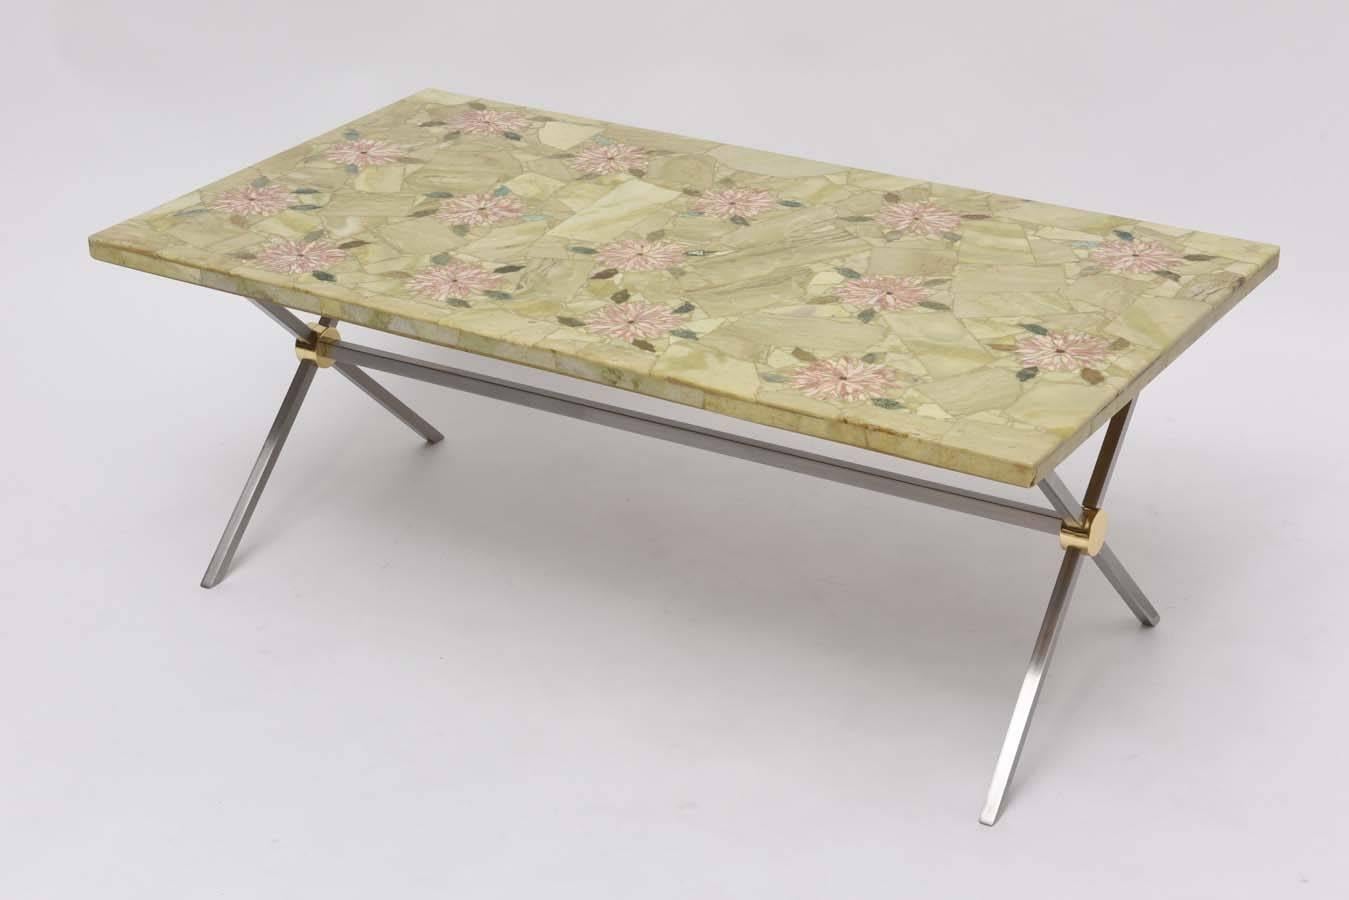 1960s Italian coffee table with brushed steel and polished brass base has beautifully executed marble mosaic top in pink and white flowers on a green background. Haute Bohemian!